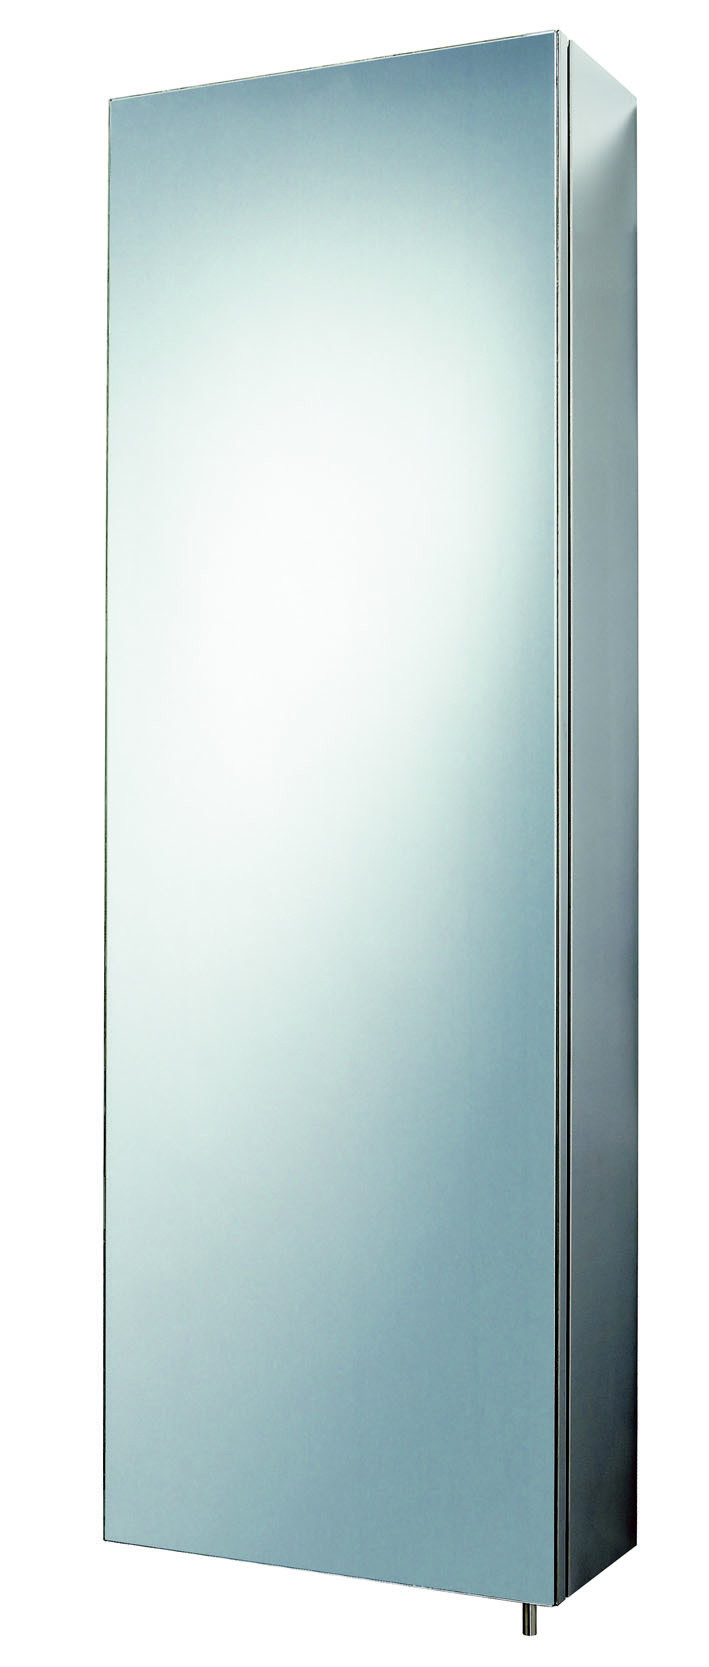 Tall Bathroom Cabinet Mirror pertaining to size 709 X 1667